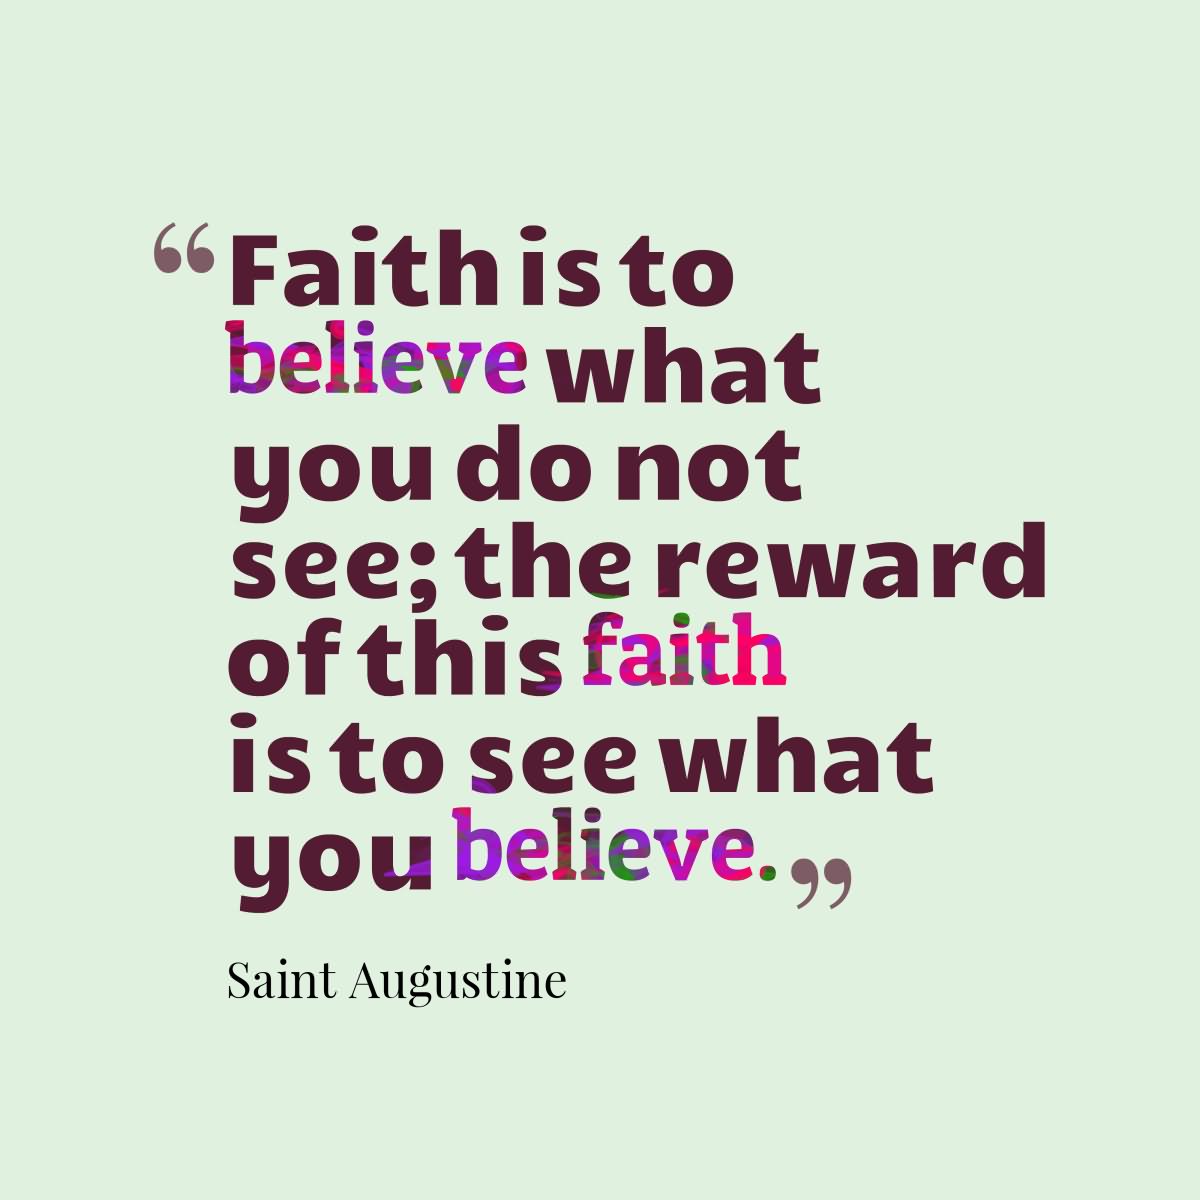 Faith is to believe what you do not see; the reward of this faith is to see what you believe. - Saint Augustine